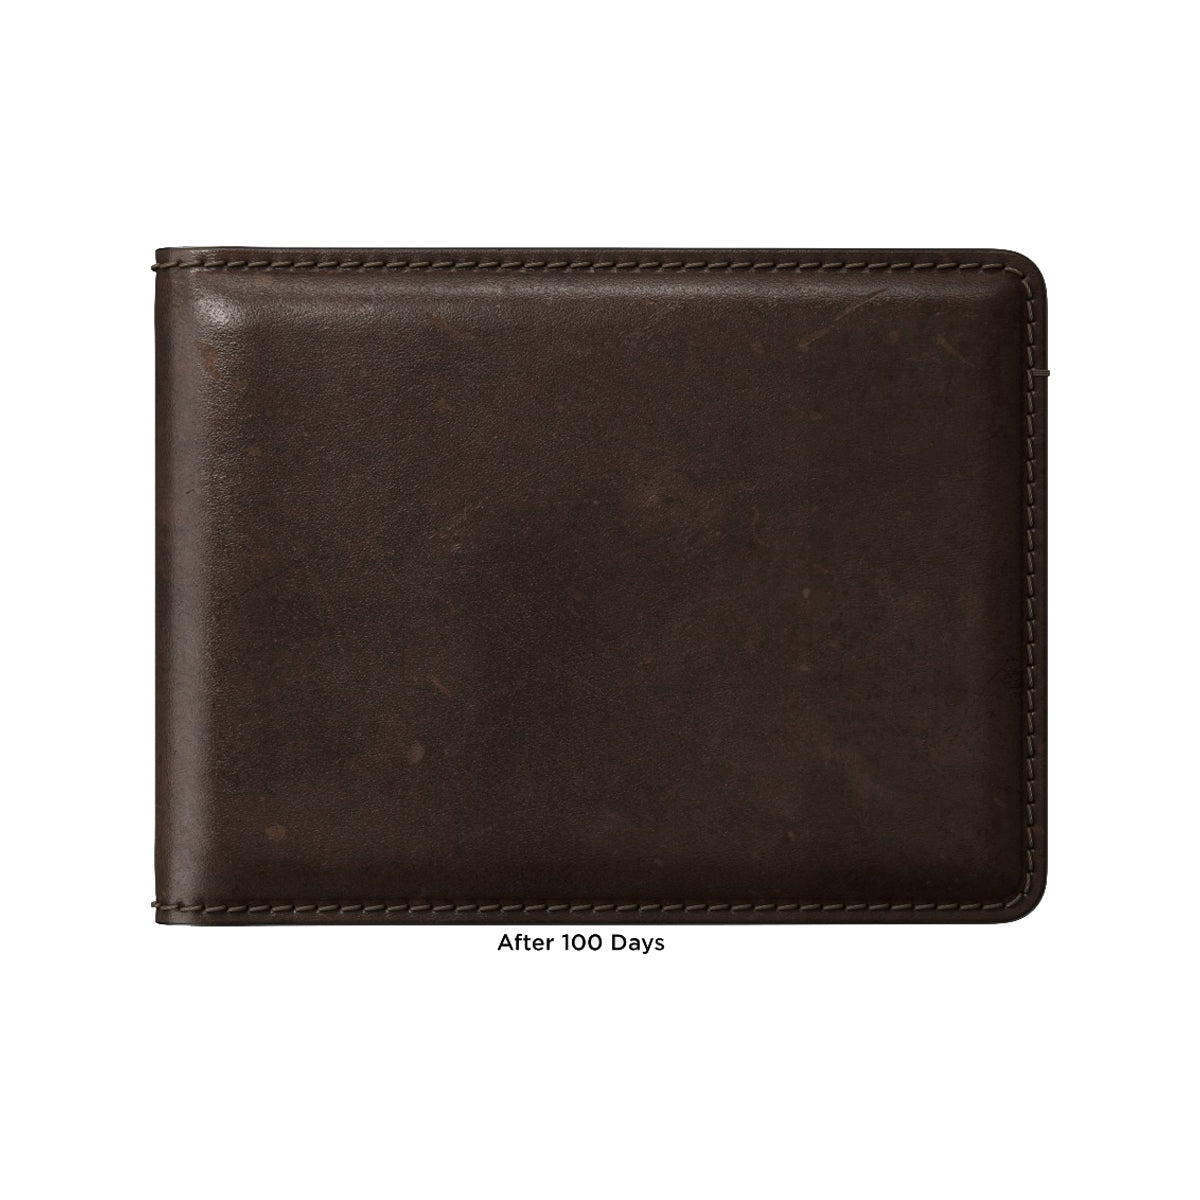 NOMAD Bifold Wallet - Rustic Brown Horween Leather.